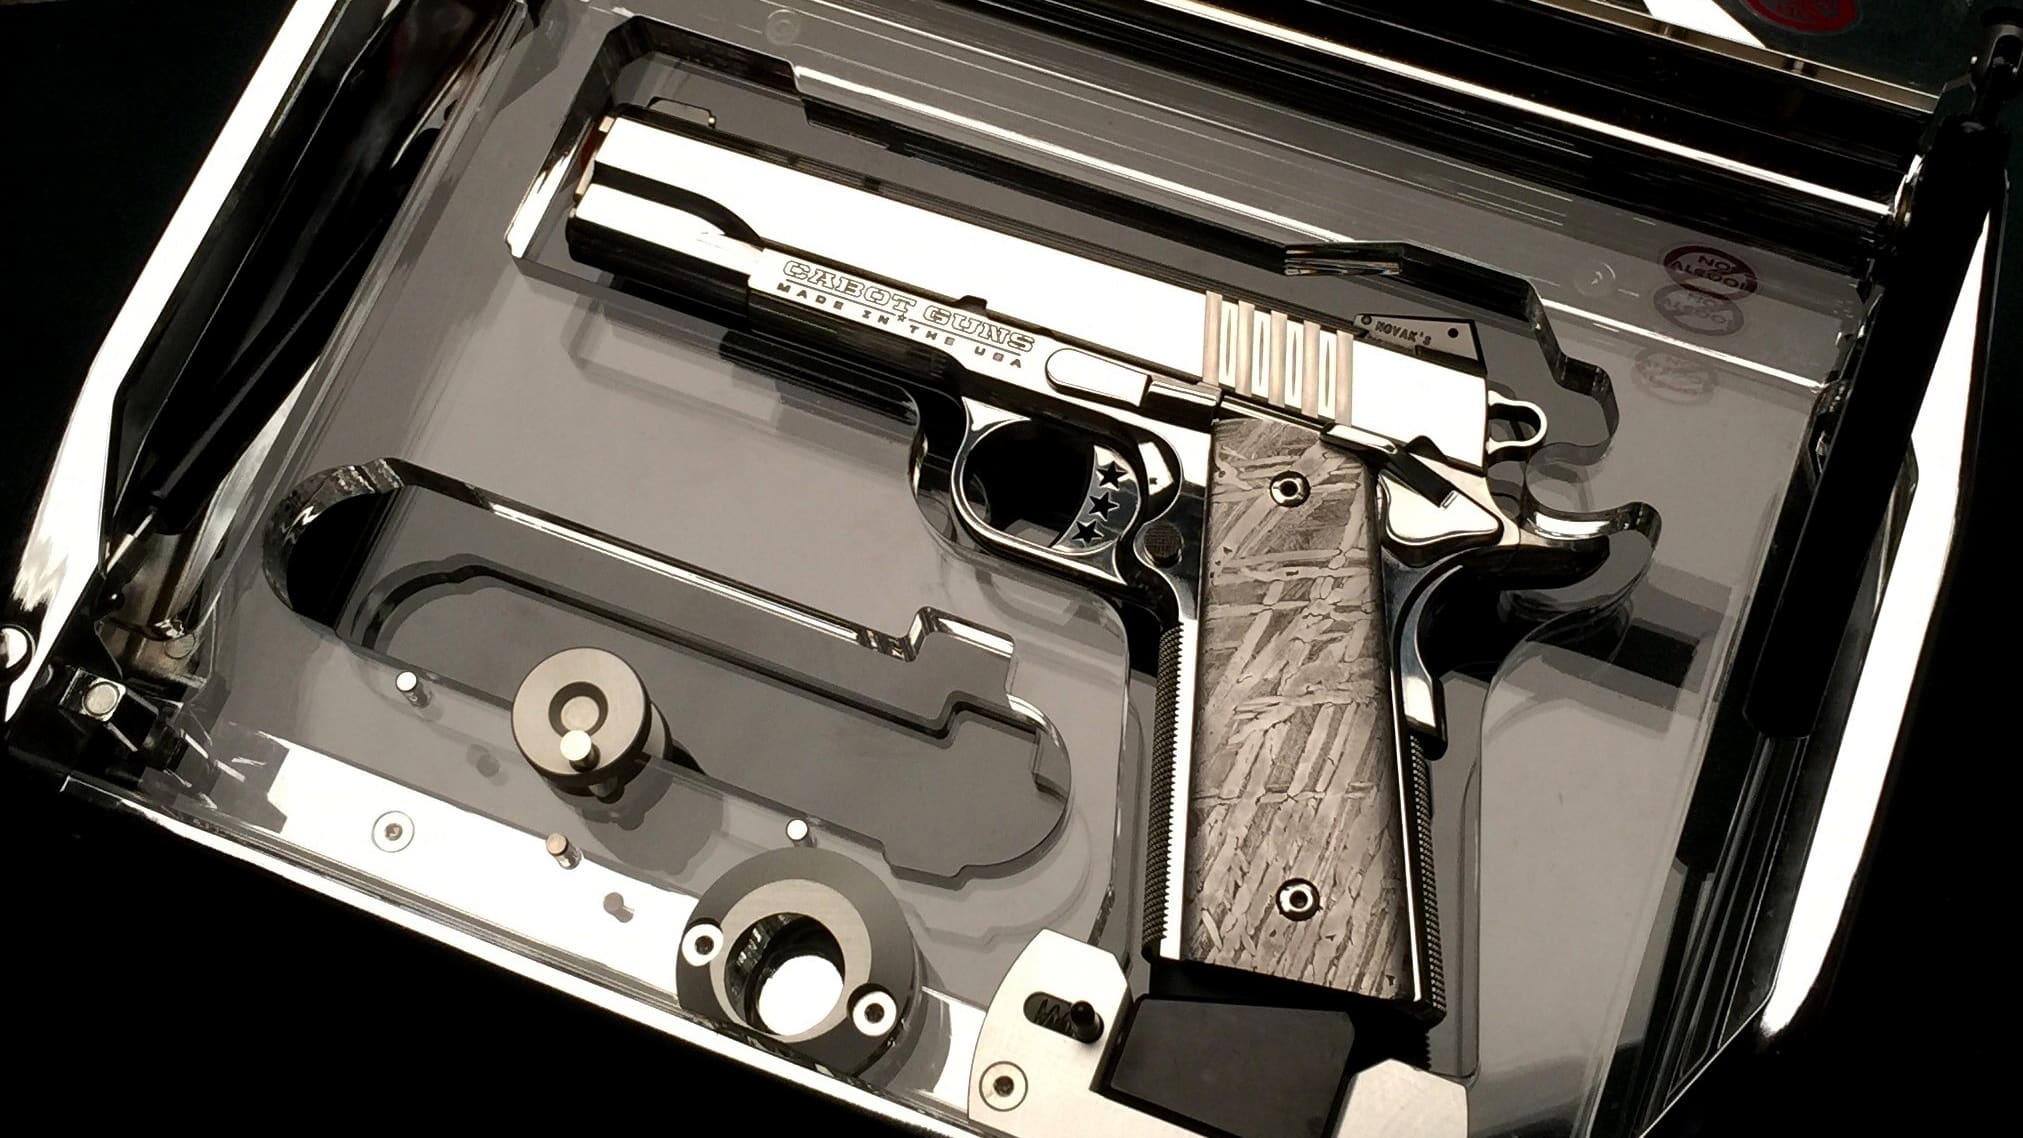 1911 Pistol: Why buy the 9mm 1911? Canfirearm.com